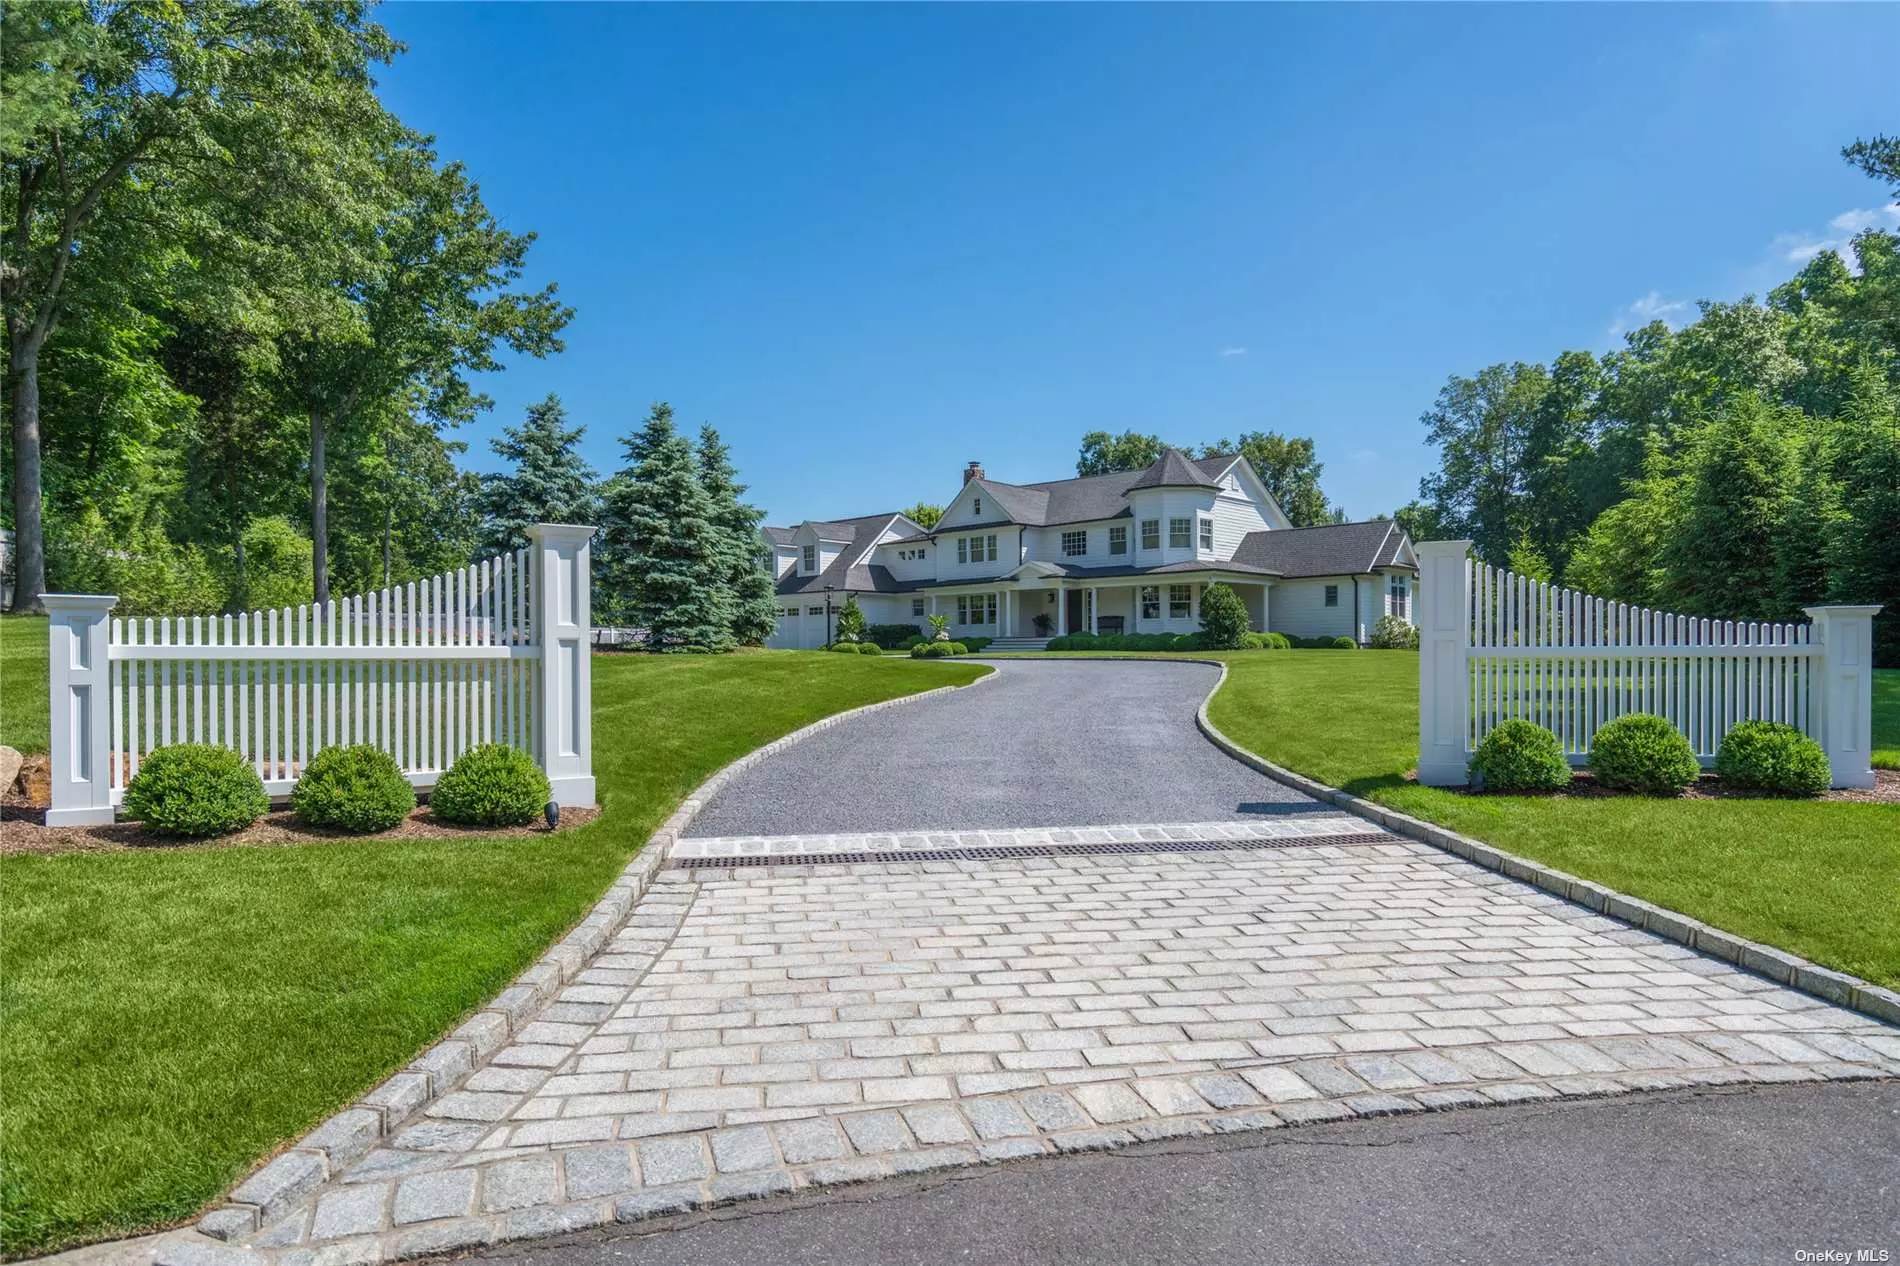 Wawapek Colonial set on two very special private acres situated on a cul de sac.